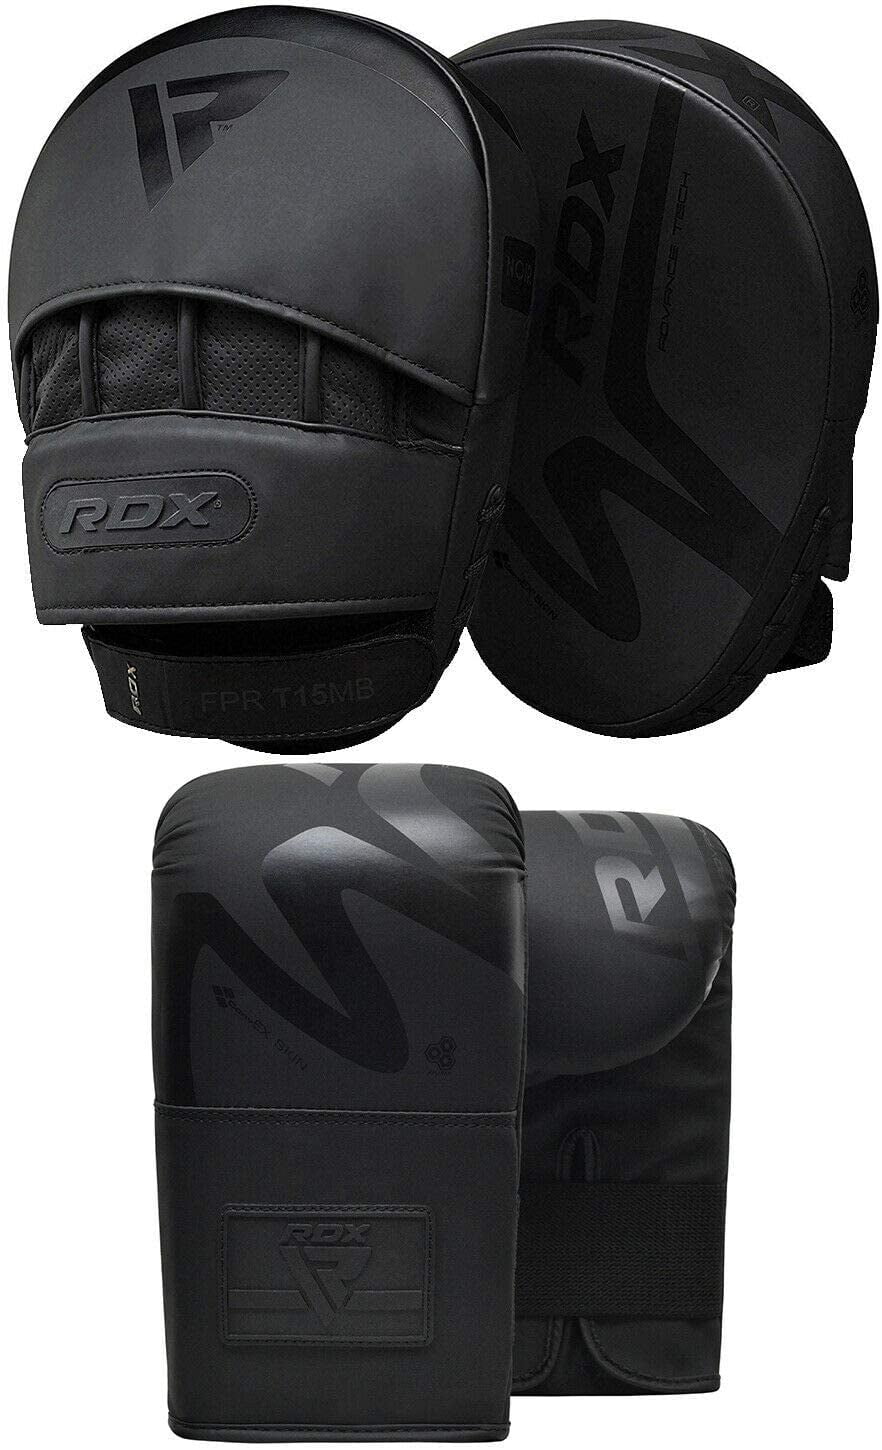 RDX Boxing Pads Muay Thai Punch Mitts MMA Focus Training Hook & Jab Kickboxing for sale online 